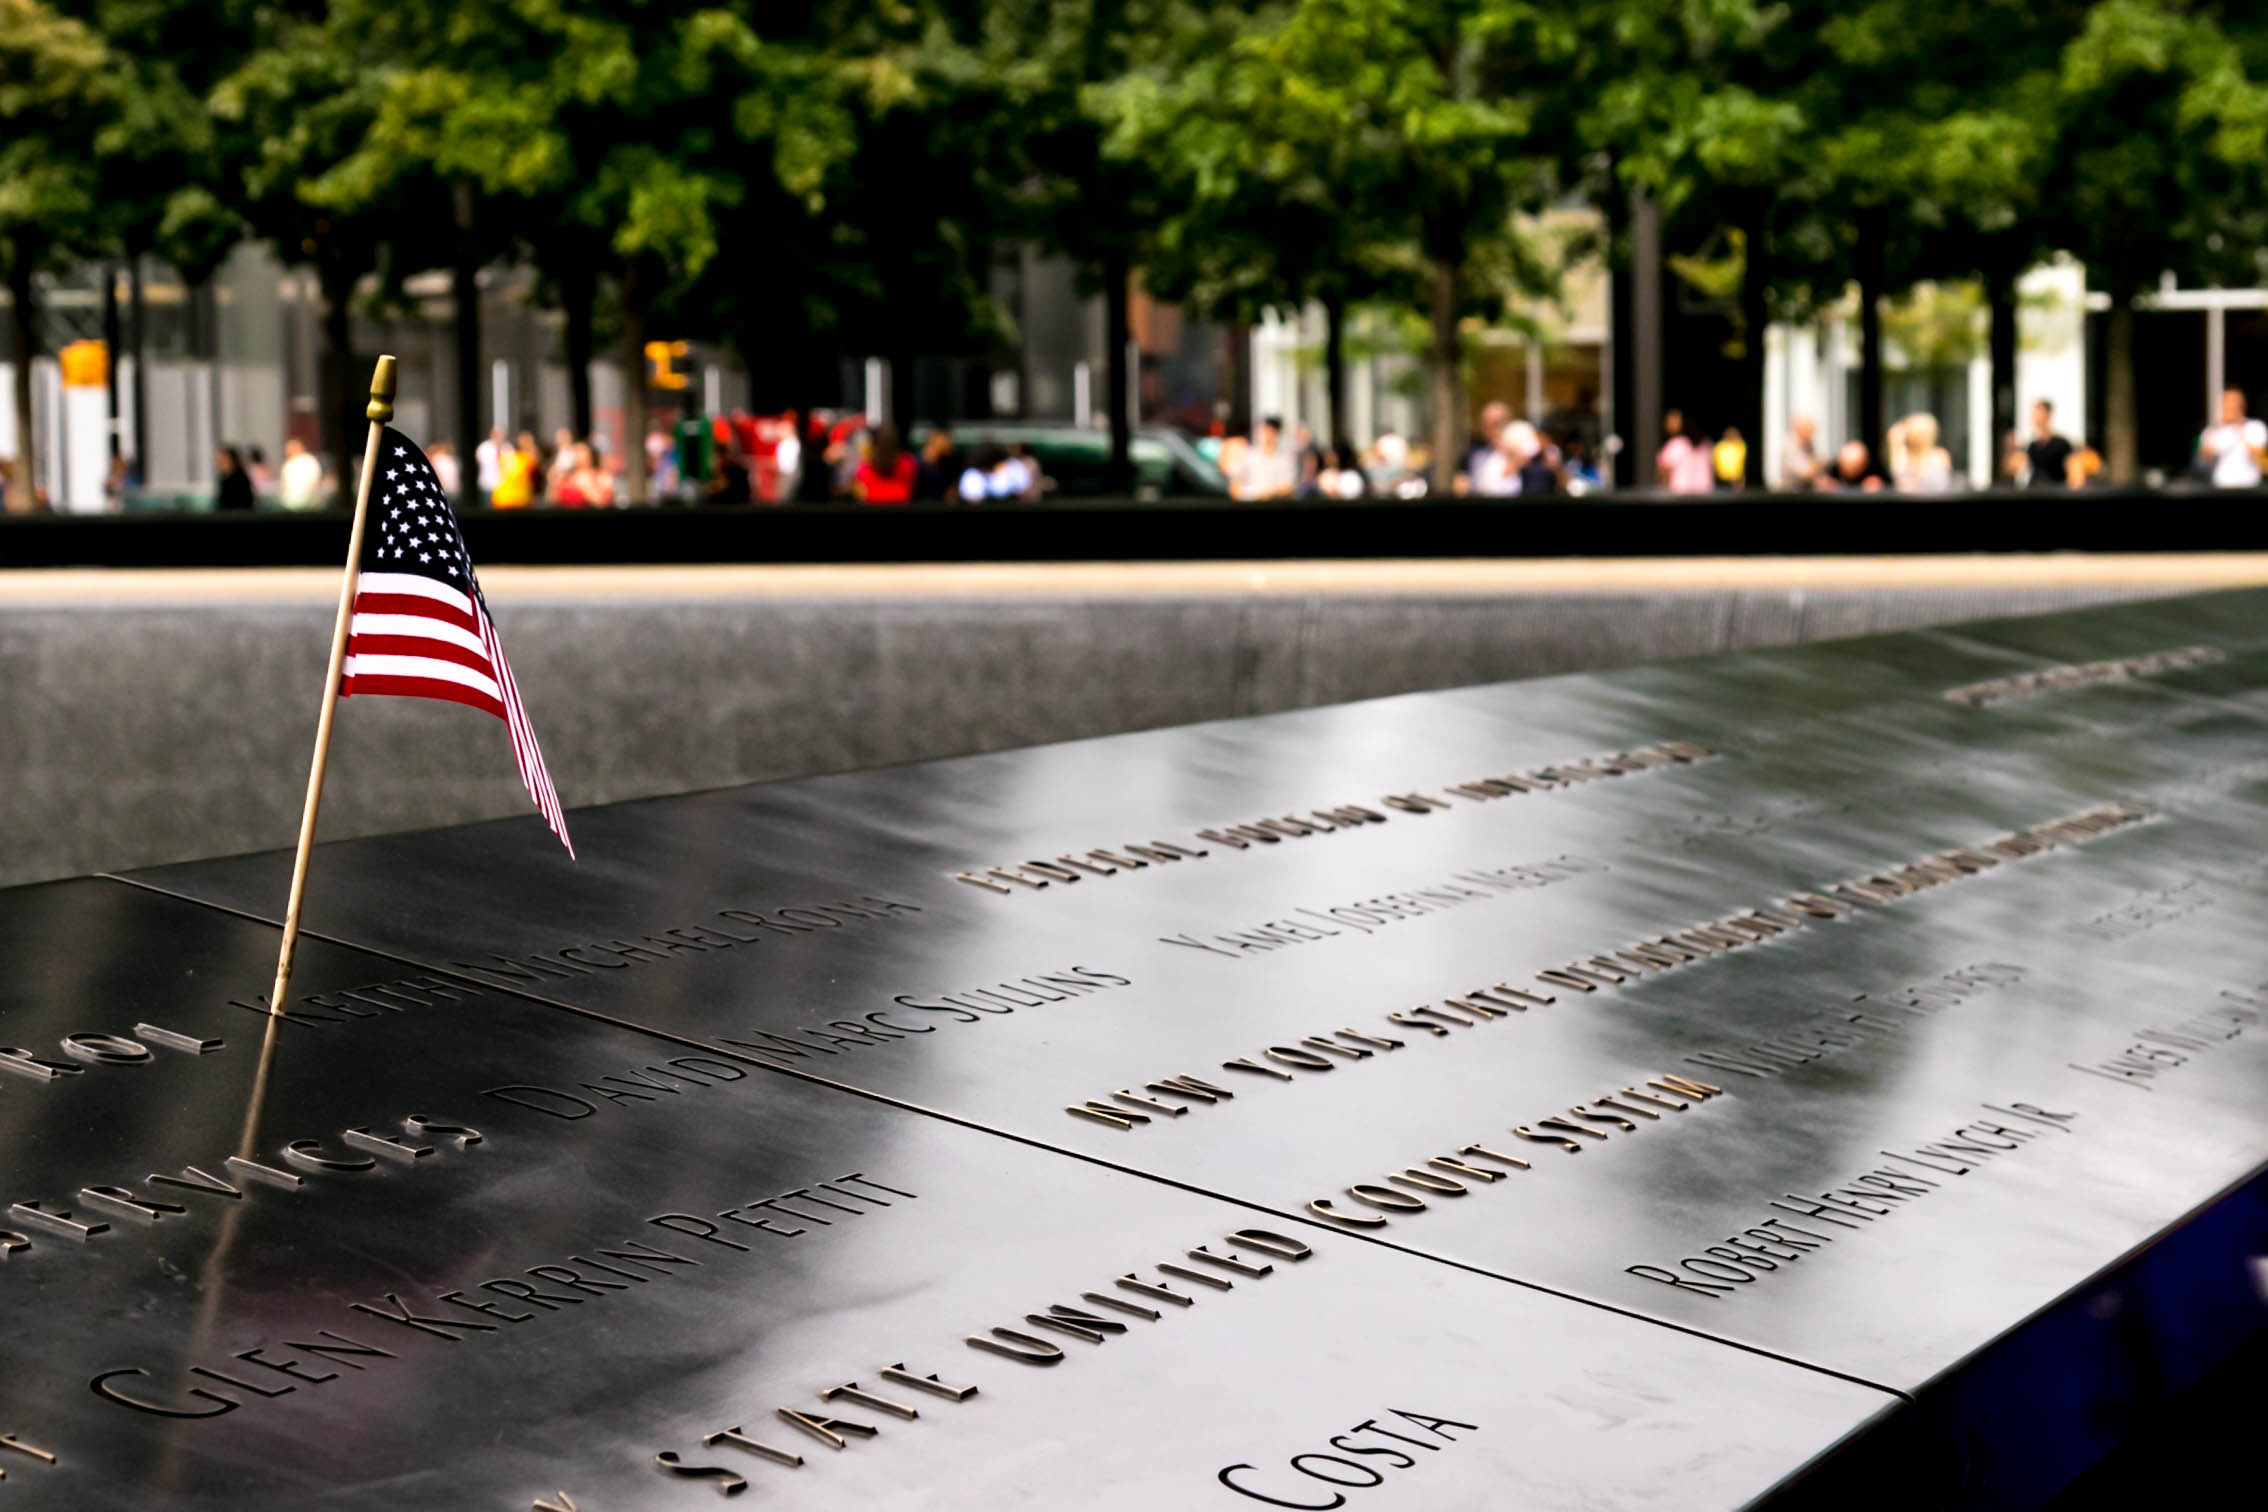 9/11 Memorial in NYC with American Flag